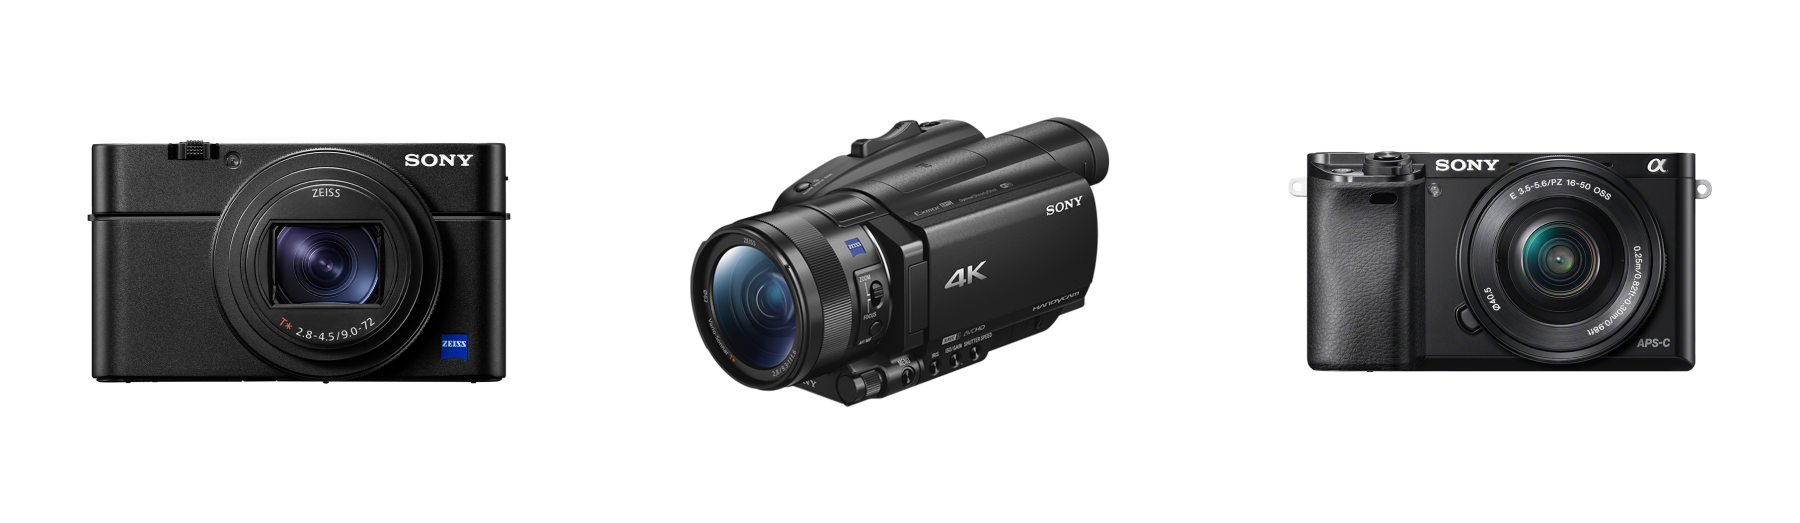 Sony-Cameras.png